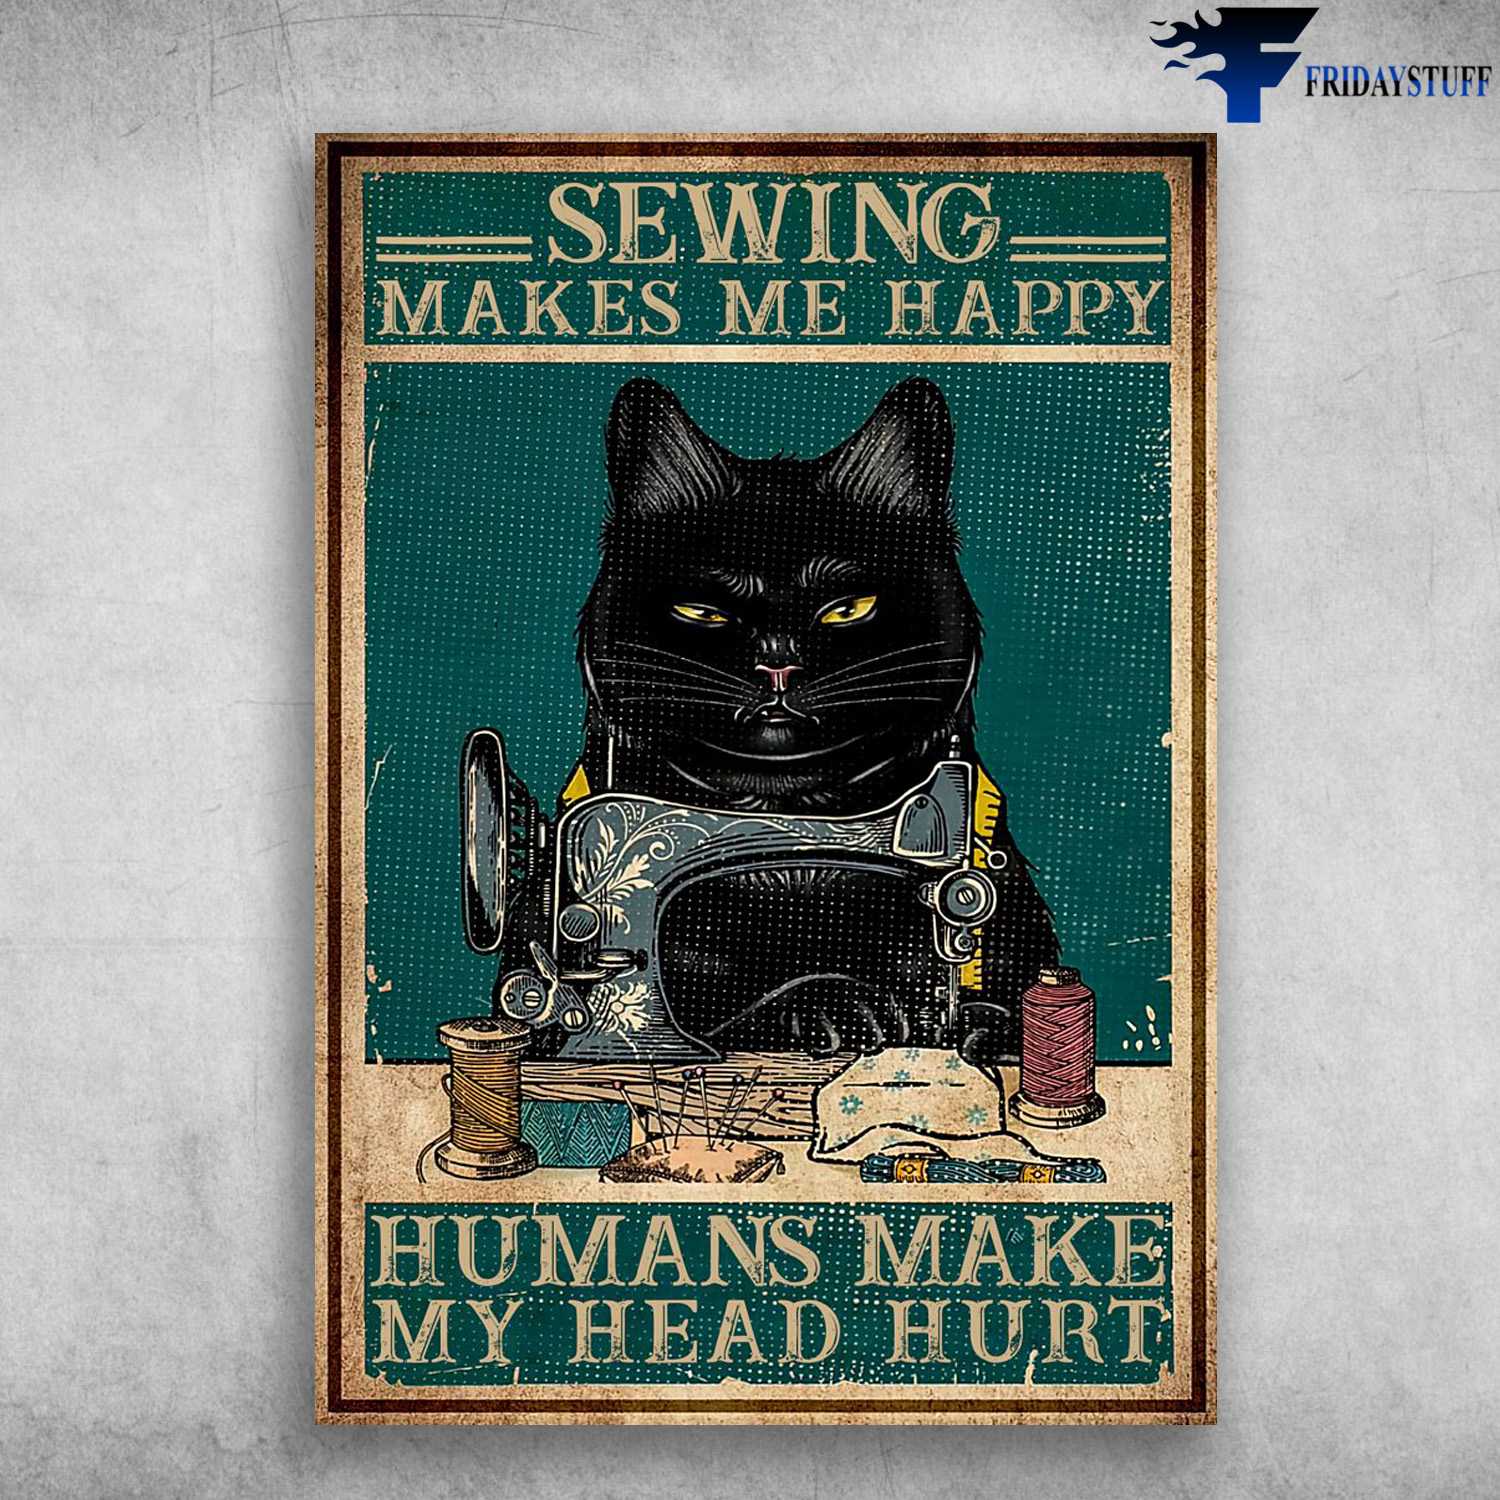 Black Cat, Sewing Cat, Sewing Poster, Sewing Makes Me Happy, Humans Make My Head Hurt